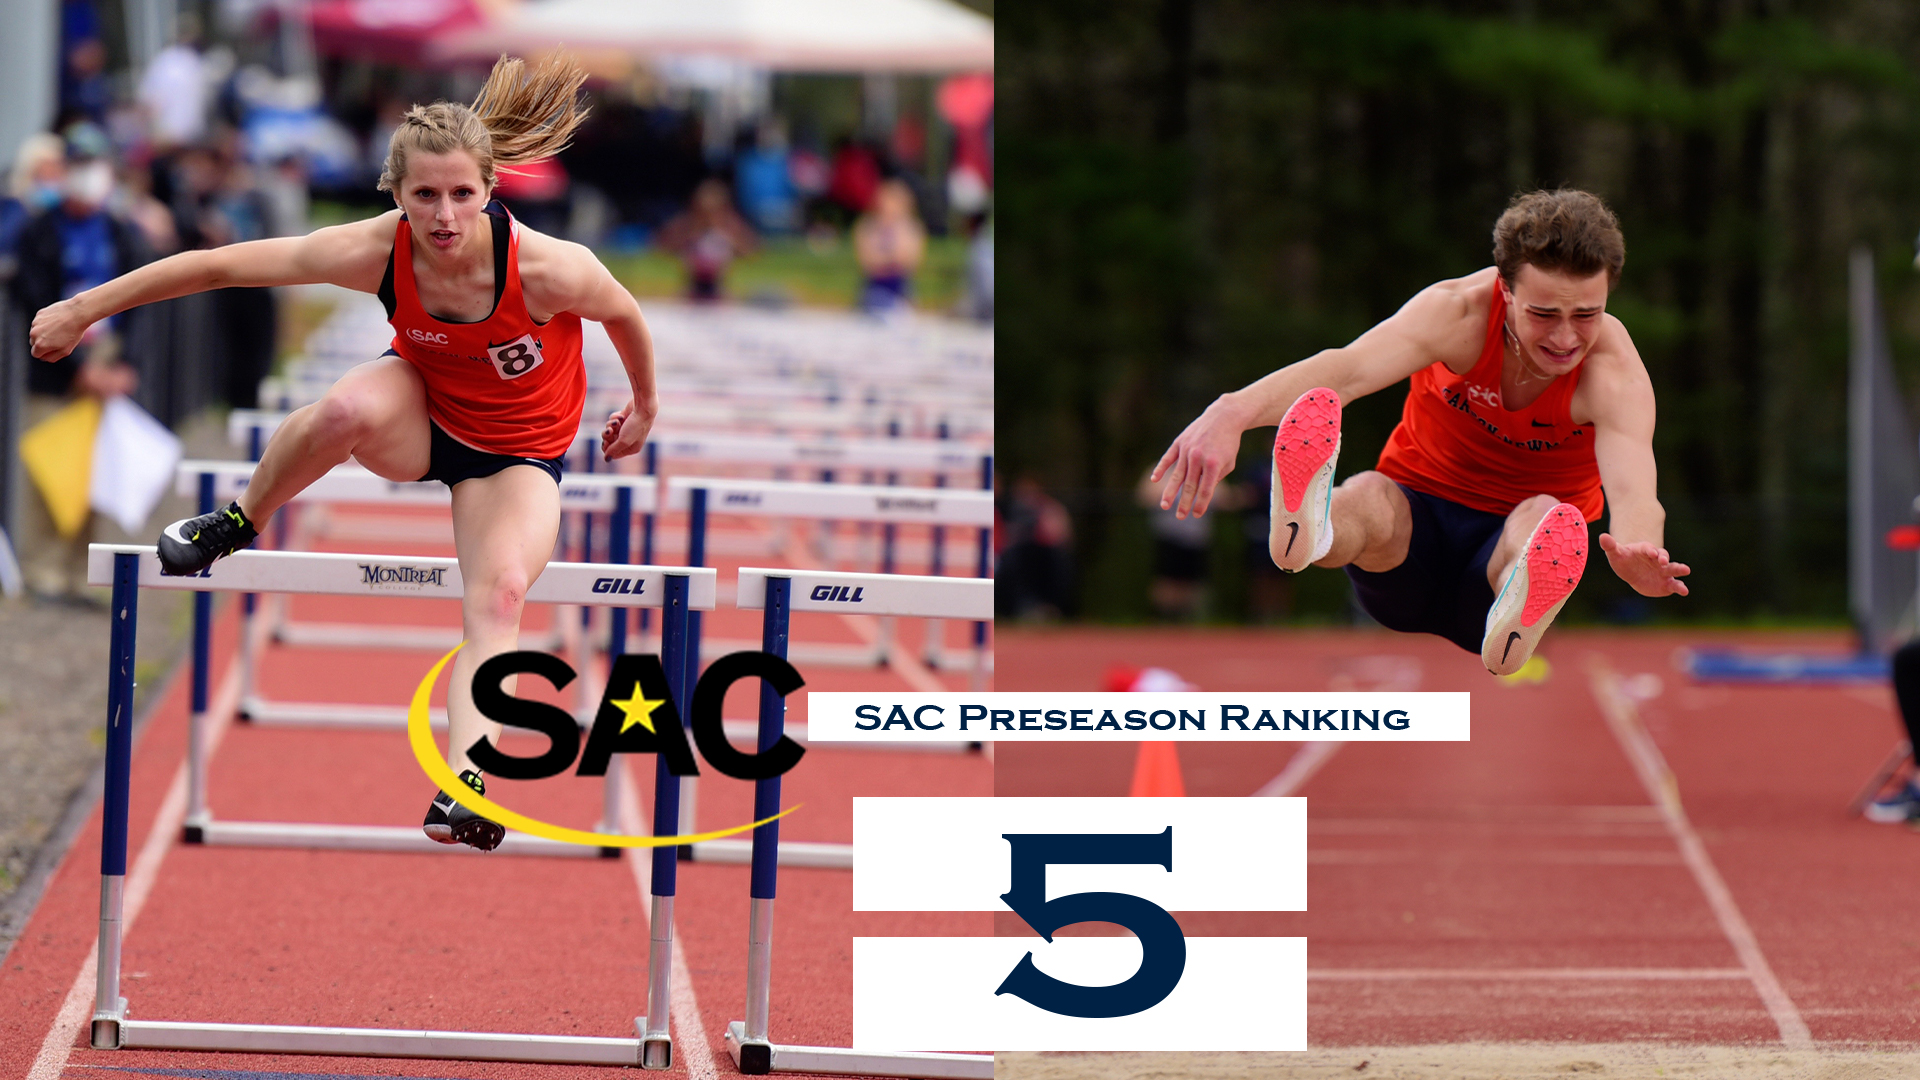 Both track & field squads projected fifth in the SAC outdoor preseason polls